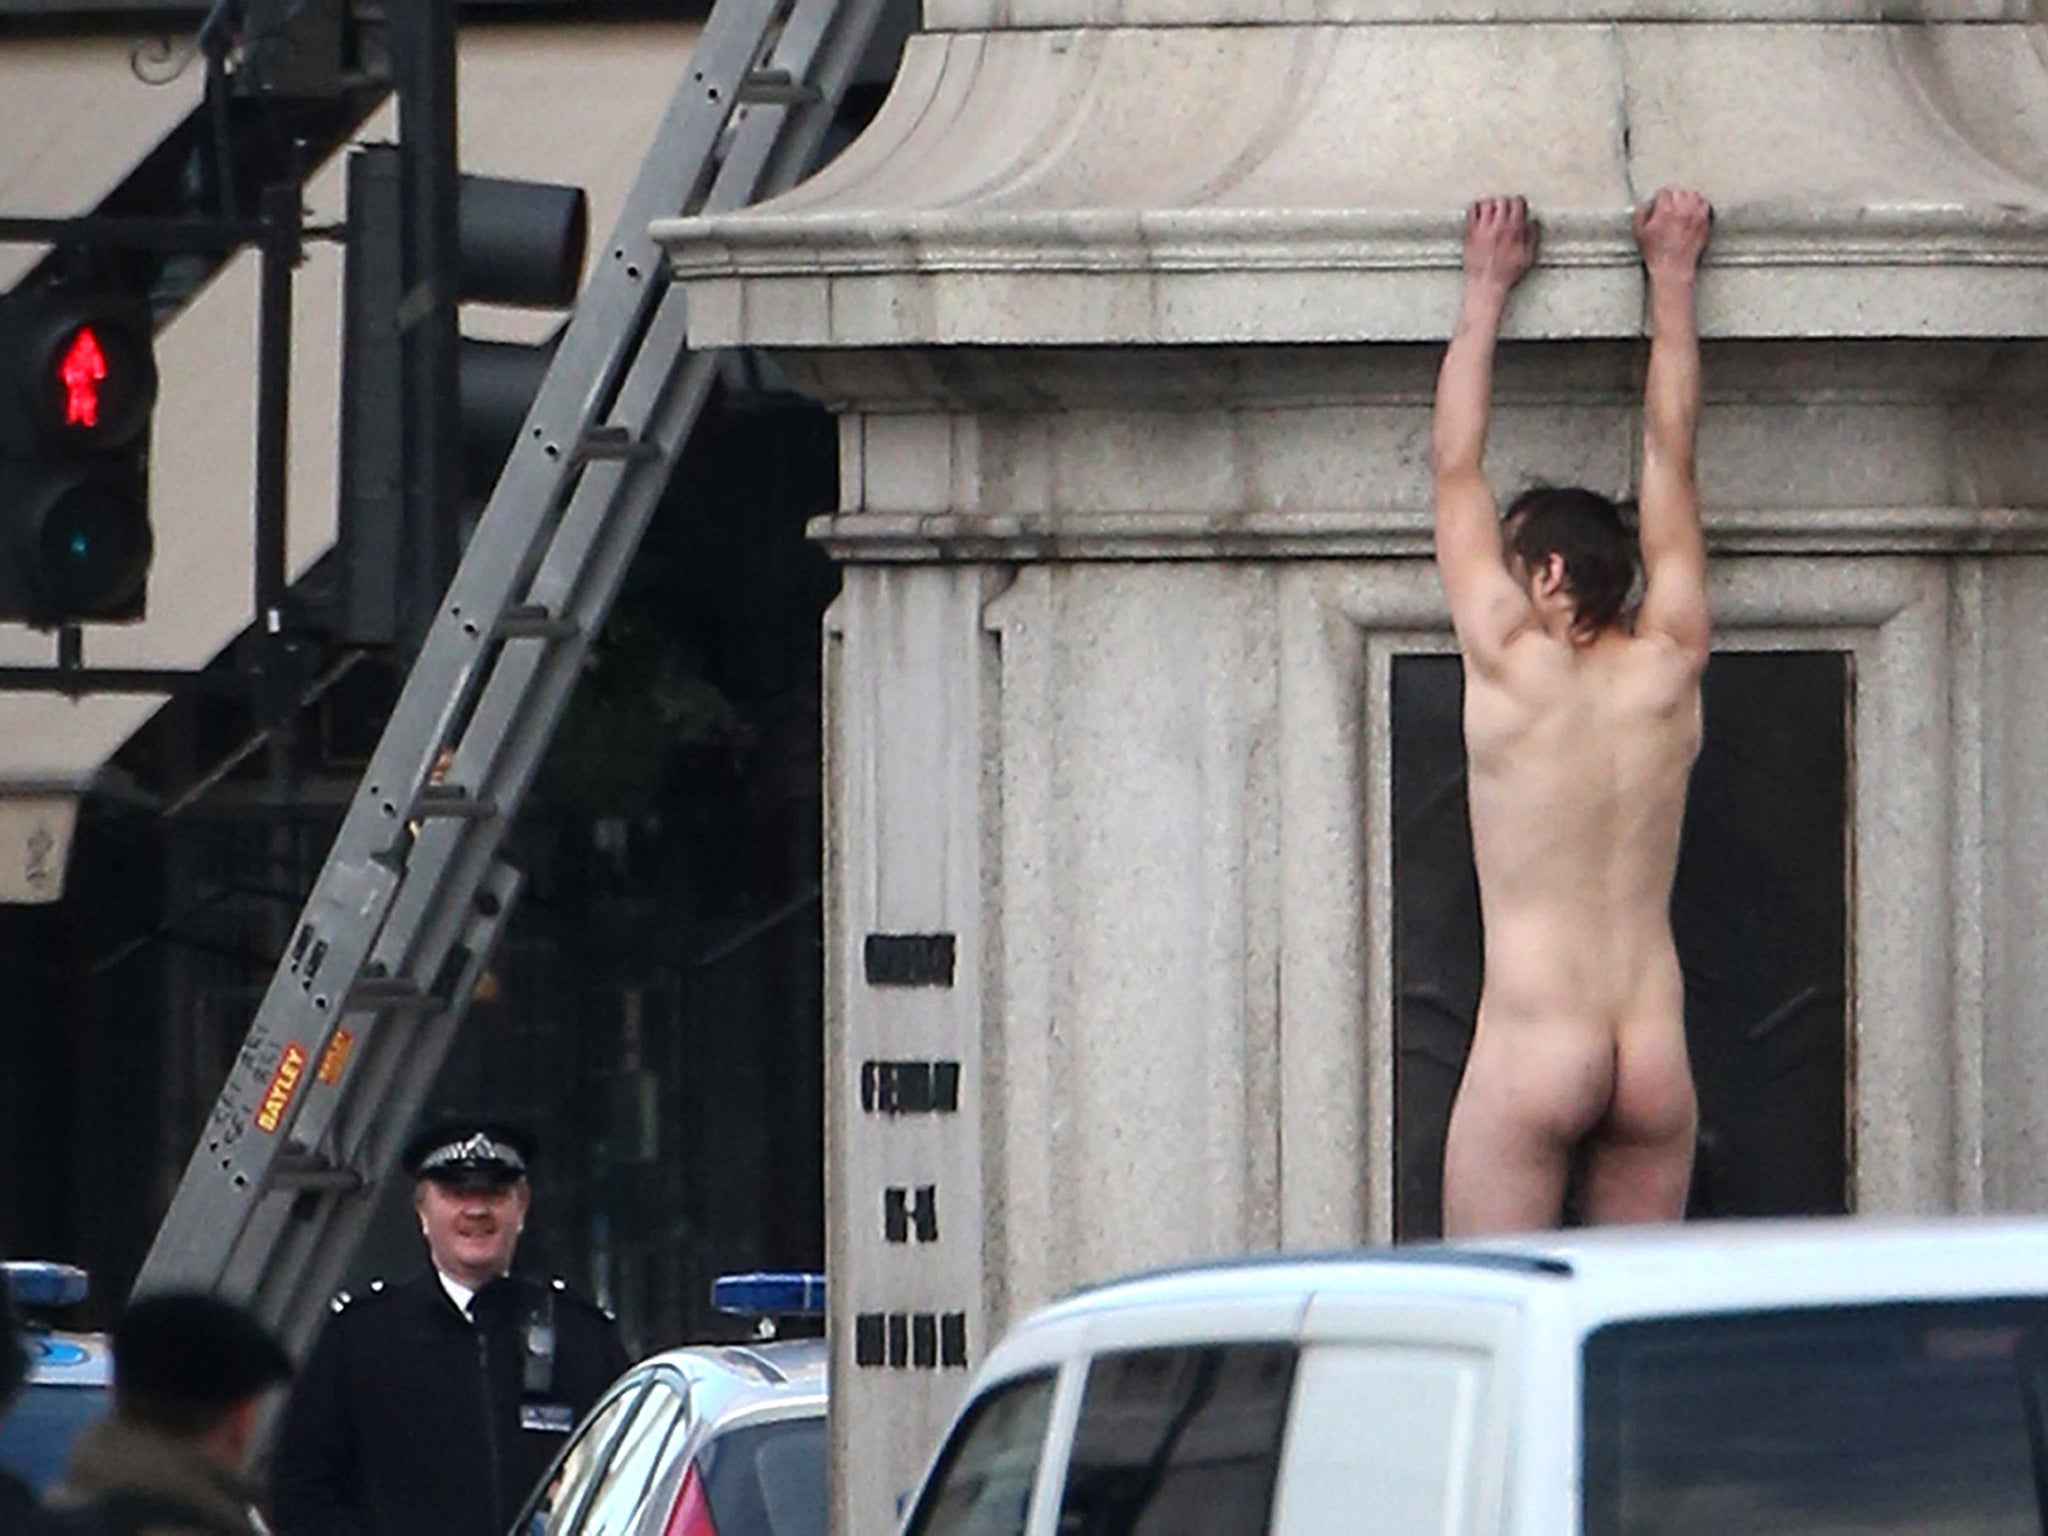 Finding yourself naked in public is high on the list of the most common nightmares